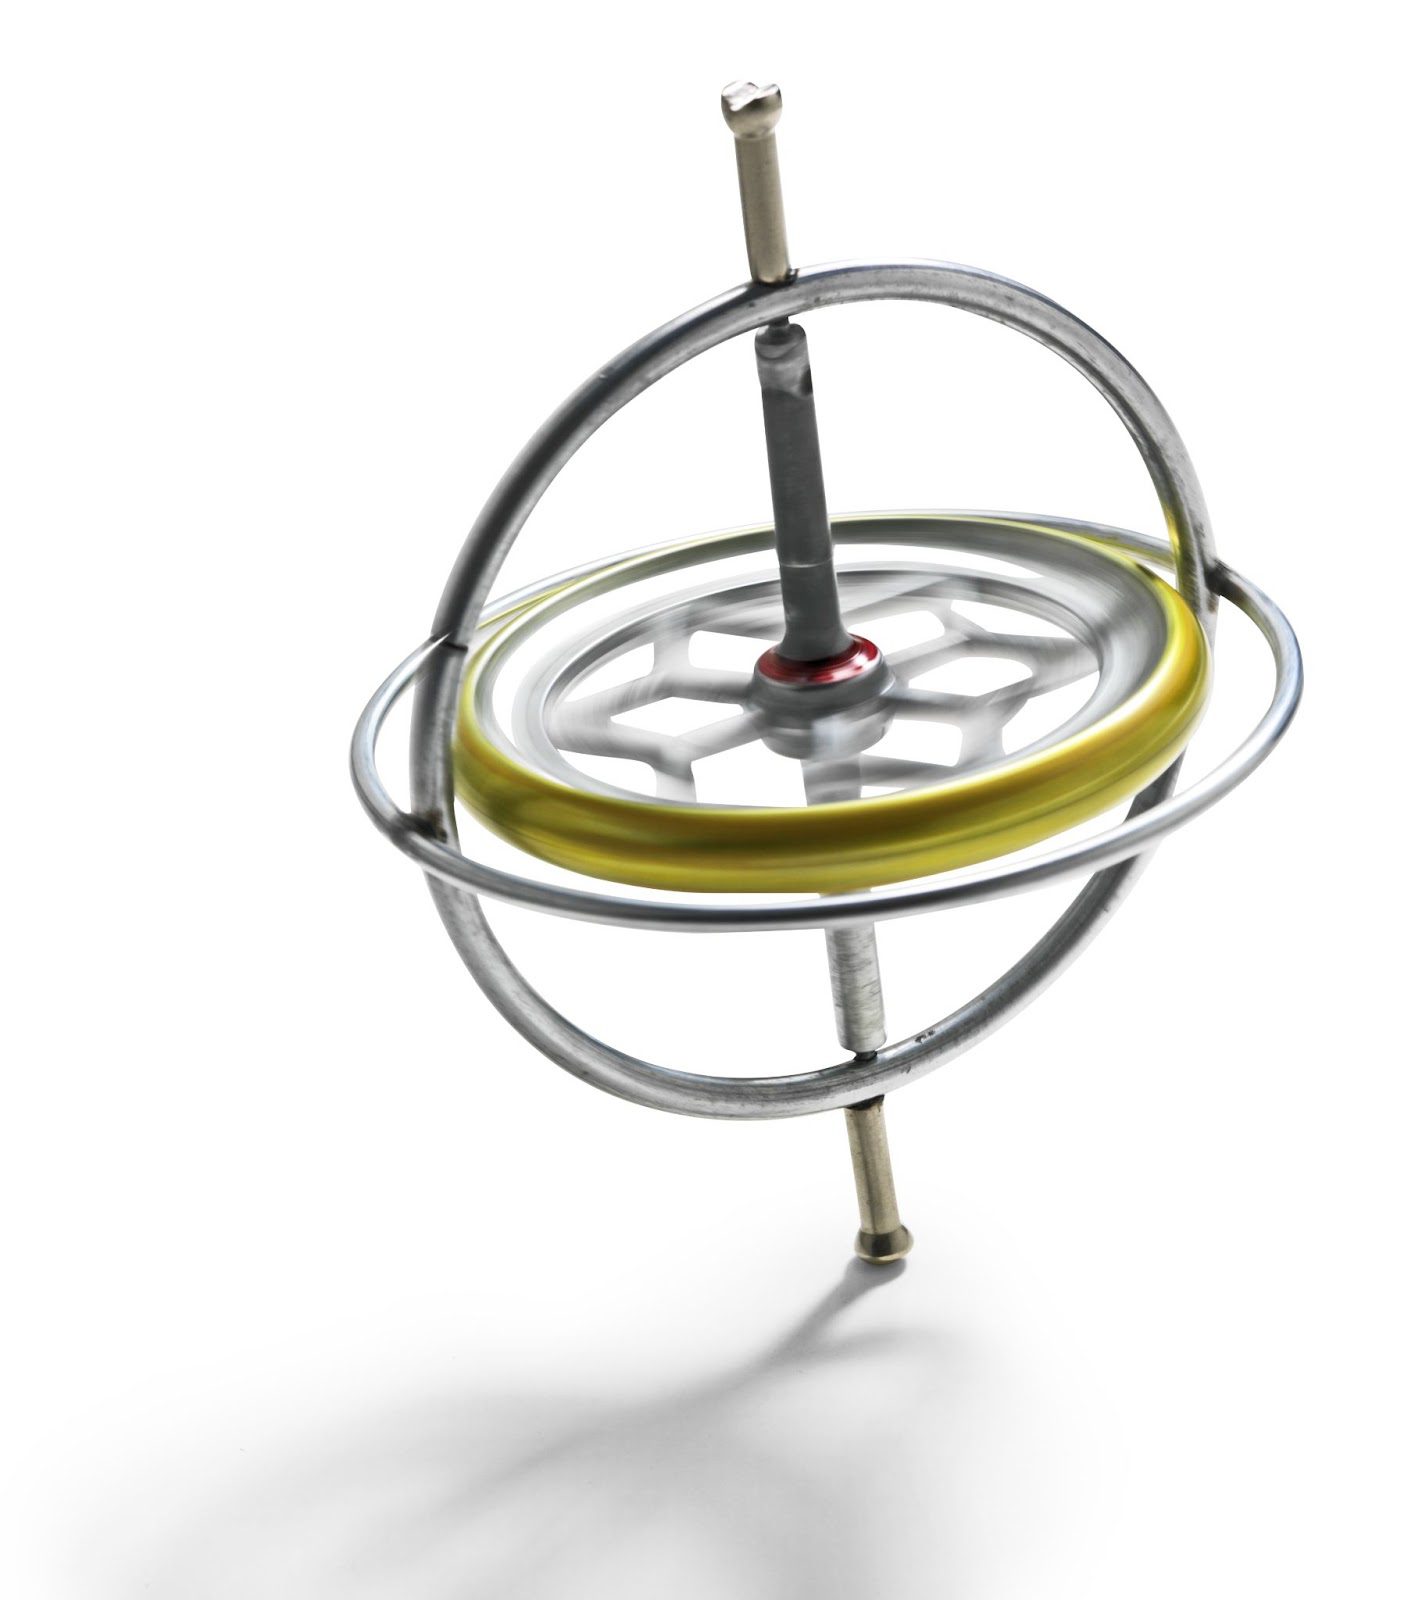 A traditional gyroscope that, when rotating, has an axial orientation unaffected by tilting or rotation of the mounting. They are often used to determine spin rate of aircraft.